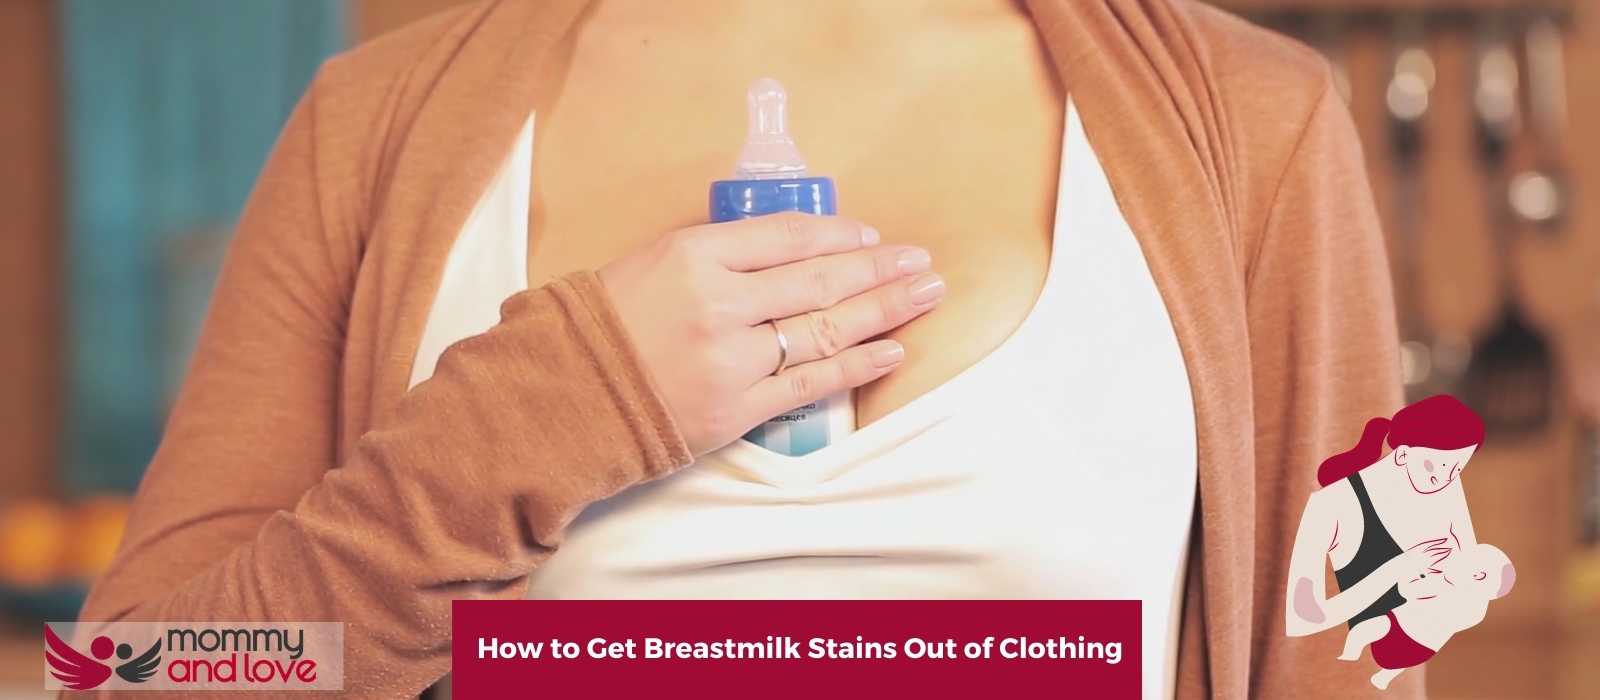 How to Get Breastmilk Stains Out of Clothing